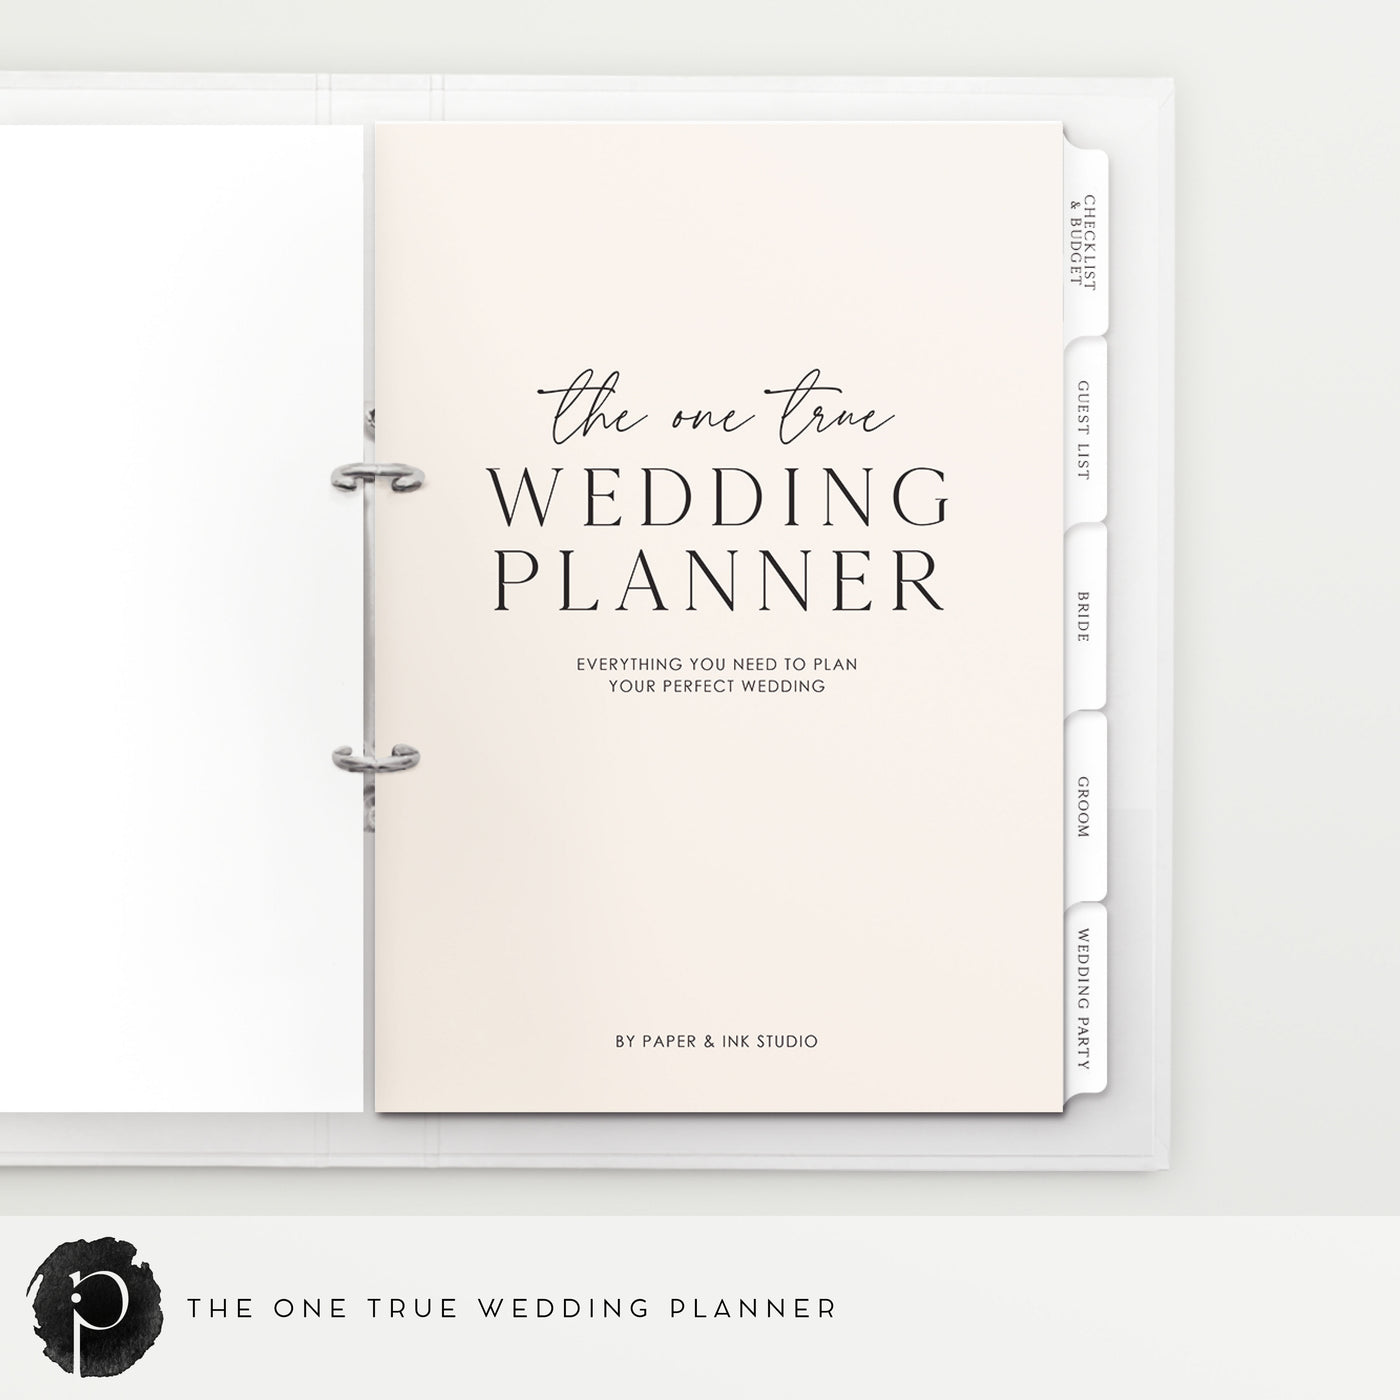 Personalised Wedding Planner & Organiser - Ultimate Guide w Checklists – Love Made Us Do It